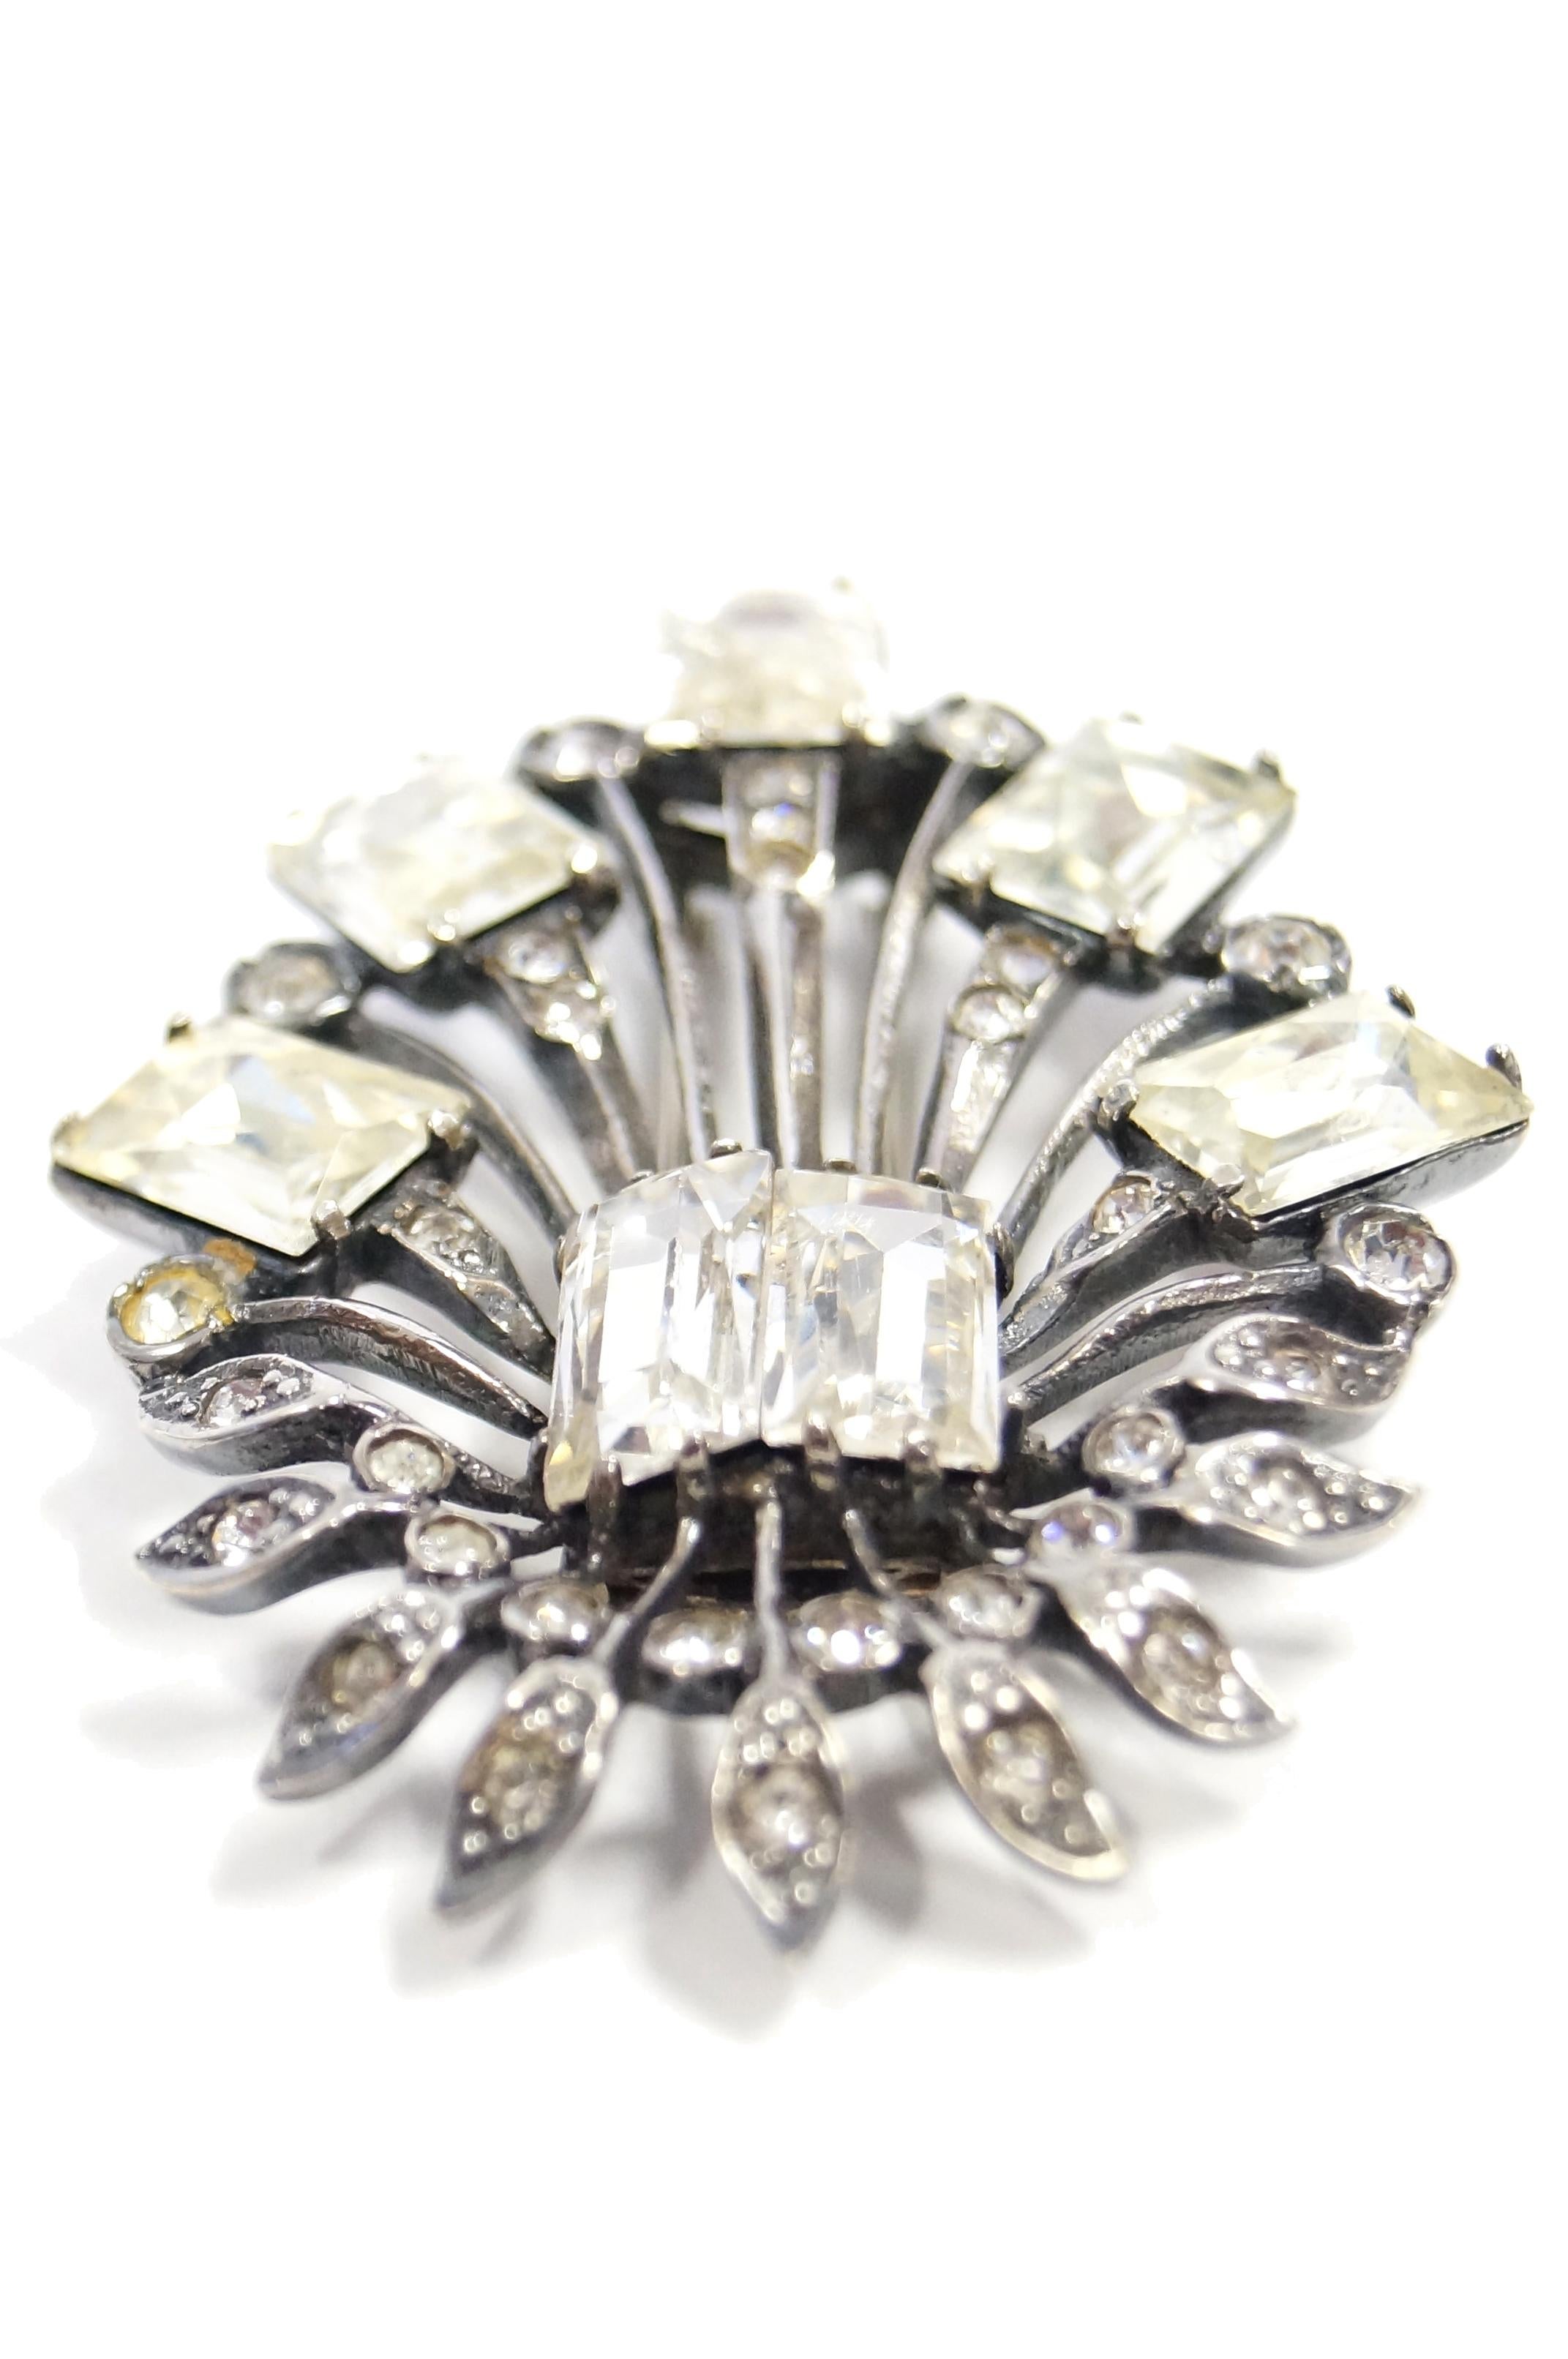 Elegant oversized sterling and rhinestone brooch by Eisenberg. The brooch consists of two large emerald cut clear rhinestones from which sprout various sterling stems. The longer stems are adorned with small round multifaceted rhinestones and are